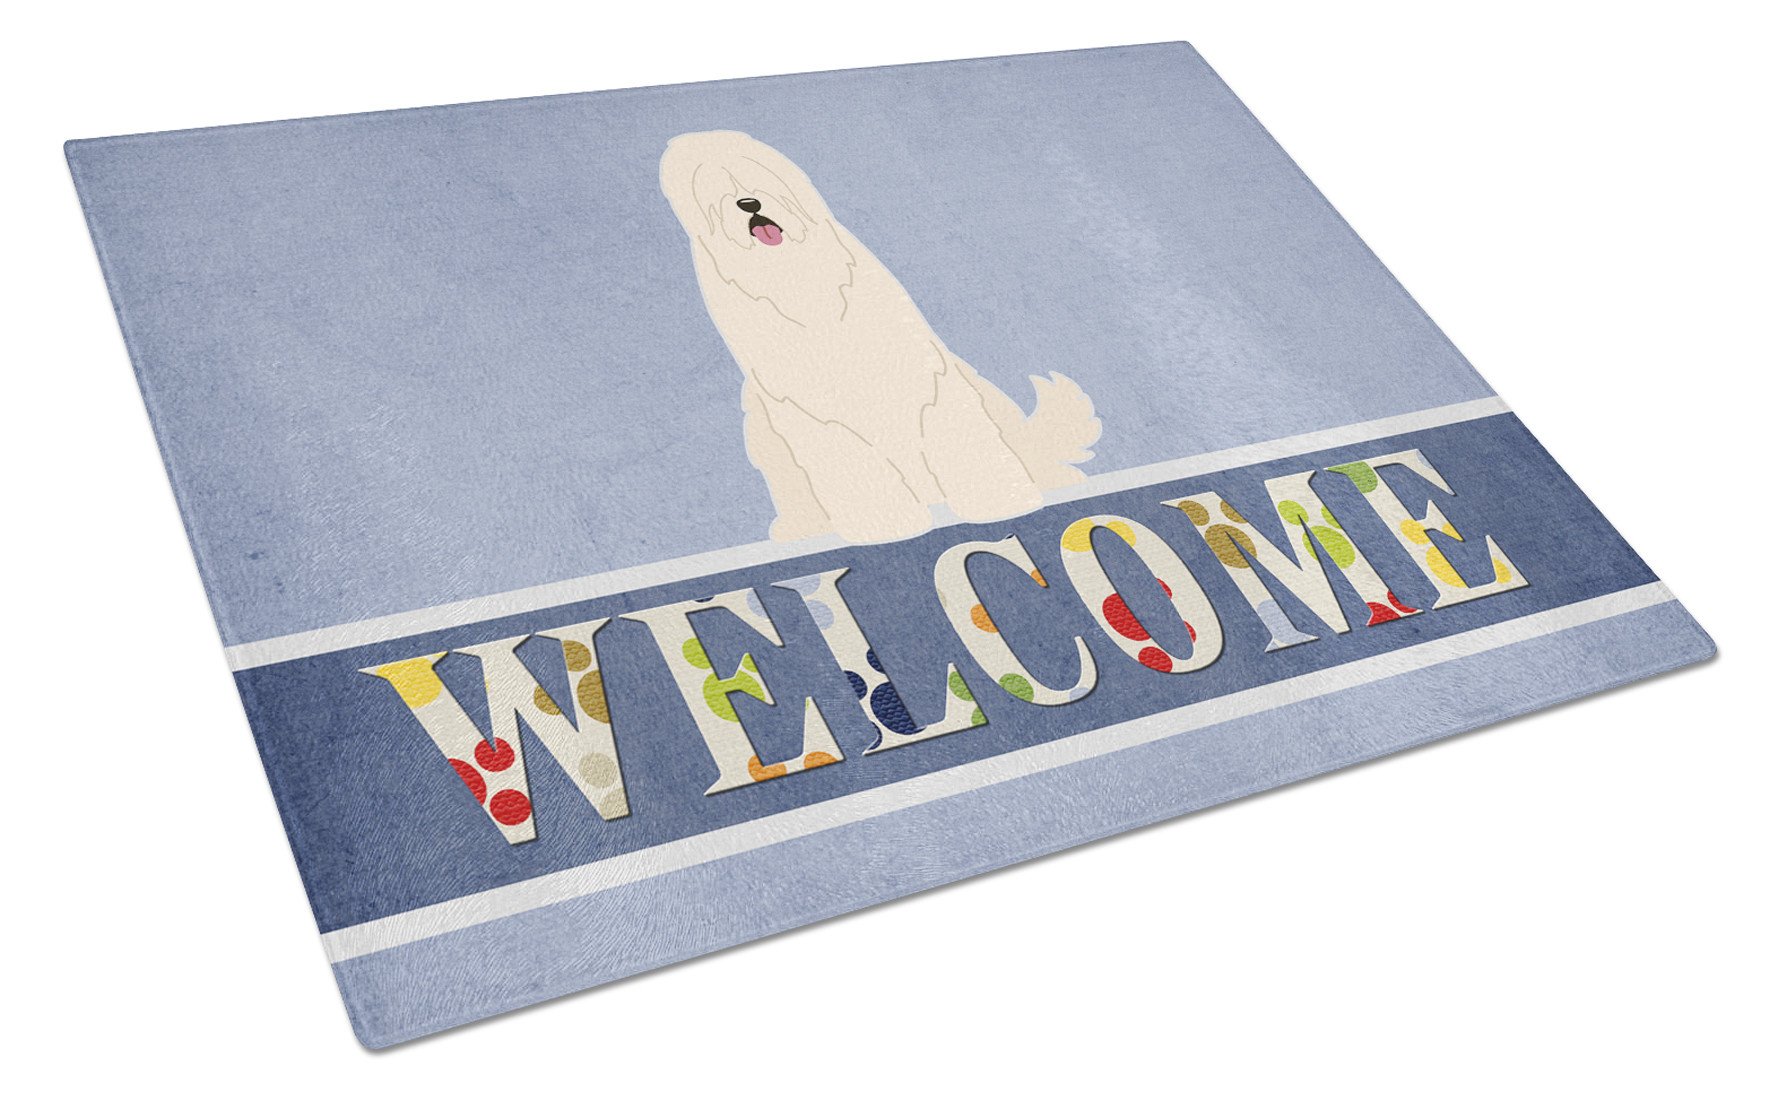 South Russian Sheepdog Welcome Glass Cutting Board Large BB5605LCB by Caroline's Treasures